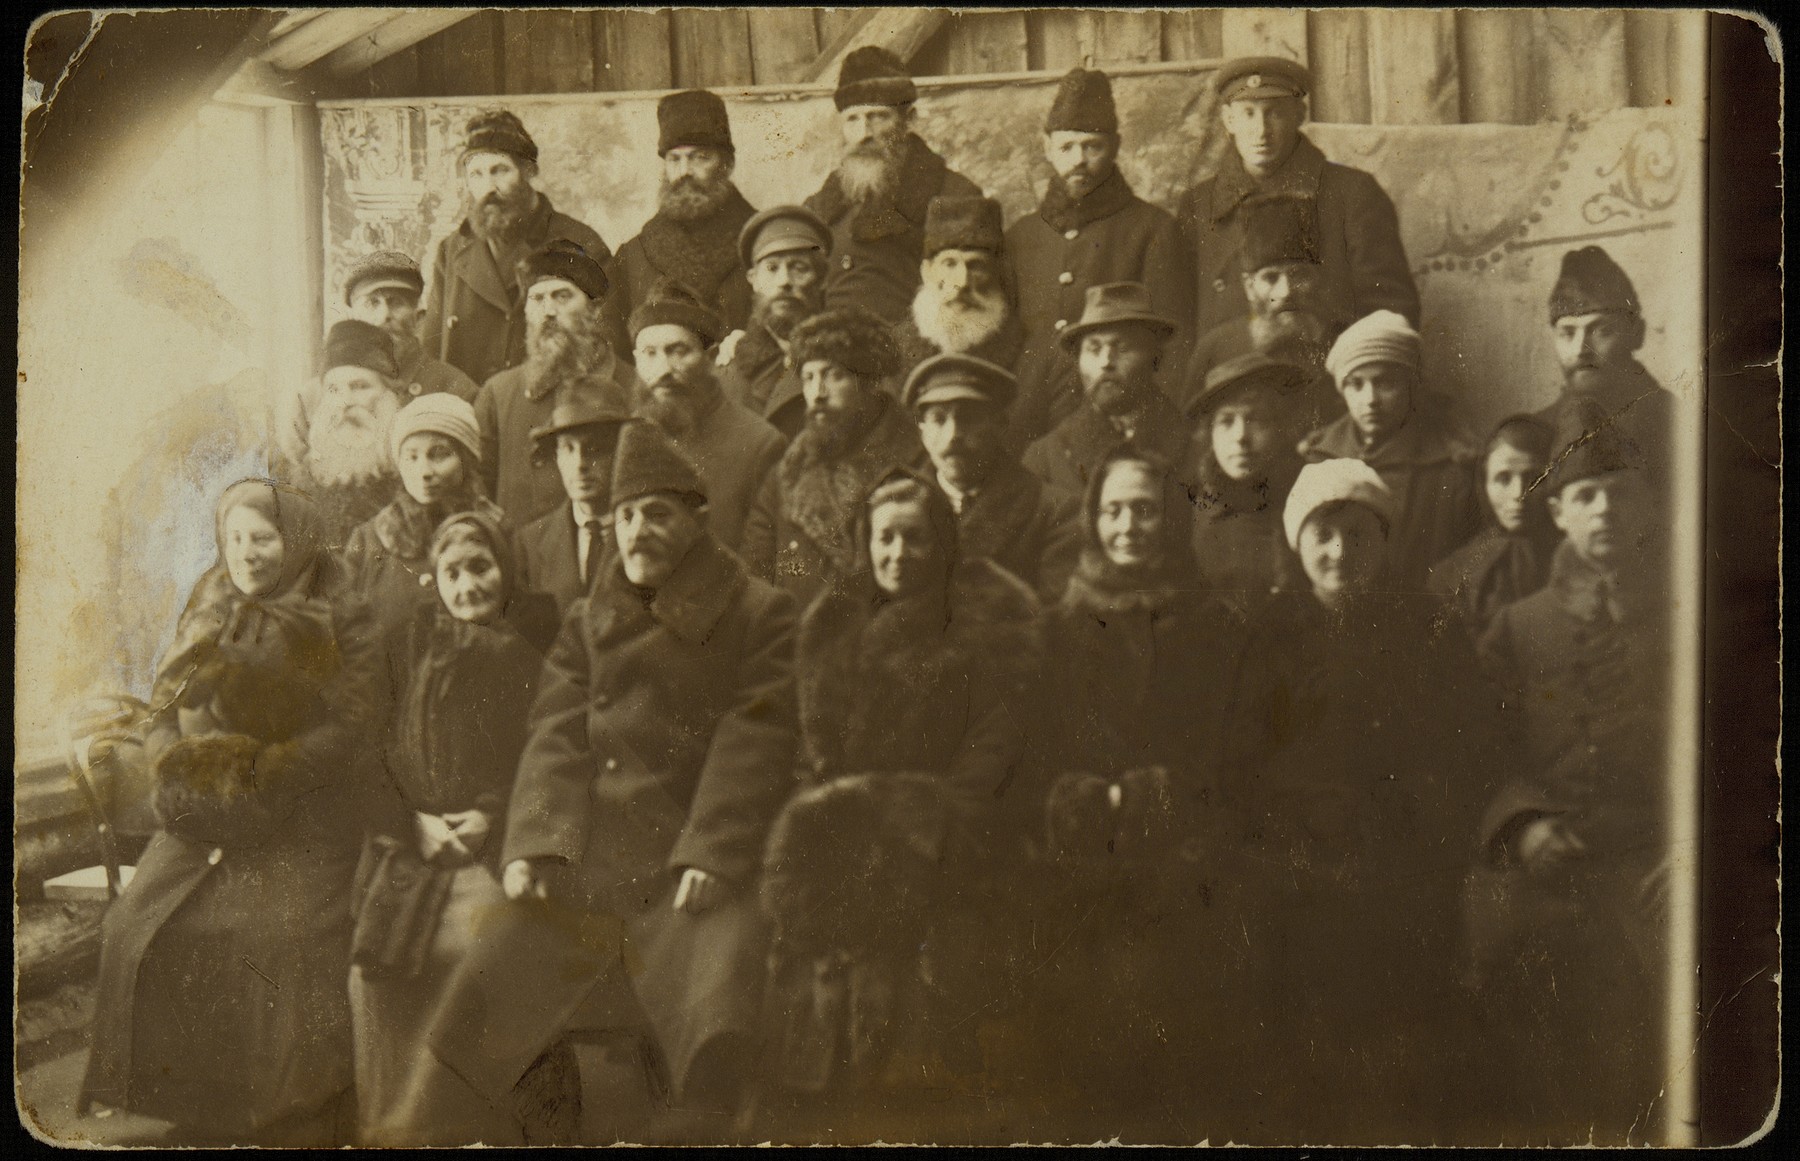 Group portrait of the Assistance Committee responsible for distributing donations of money to Eisiskes from America. 

The photo was taken in honor of Aaron-Don Becker (front row, third from left), who in 1920 brought a large donation to the shtetl from the Eishyshker Society in New York.  Seated to the right of Aaron-Don is his relative Sarah Kaganowicz, to his left is Hayya Sonenson, head of the Froyen Farain (Union of Women); Libe-Gittel Rudzin; her daughter, Miriam Kaganowicz; and husband Shael, relatives of Aaron-Dan.  Also pictured in the photo are members of the Pachianko family, members of the Kahal, and clergy.  Standing in the back, between Aaron-Don and Hayya Sonenson, is Reb Hertz Mendl Hutner, the shtetl judge.